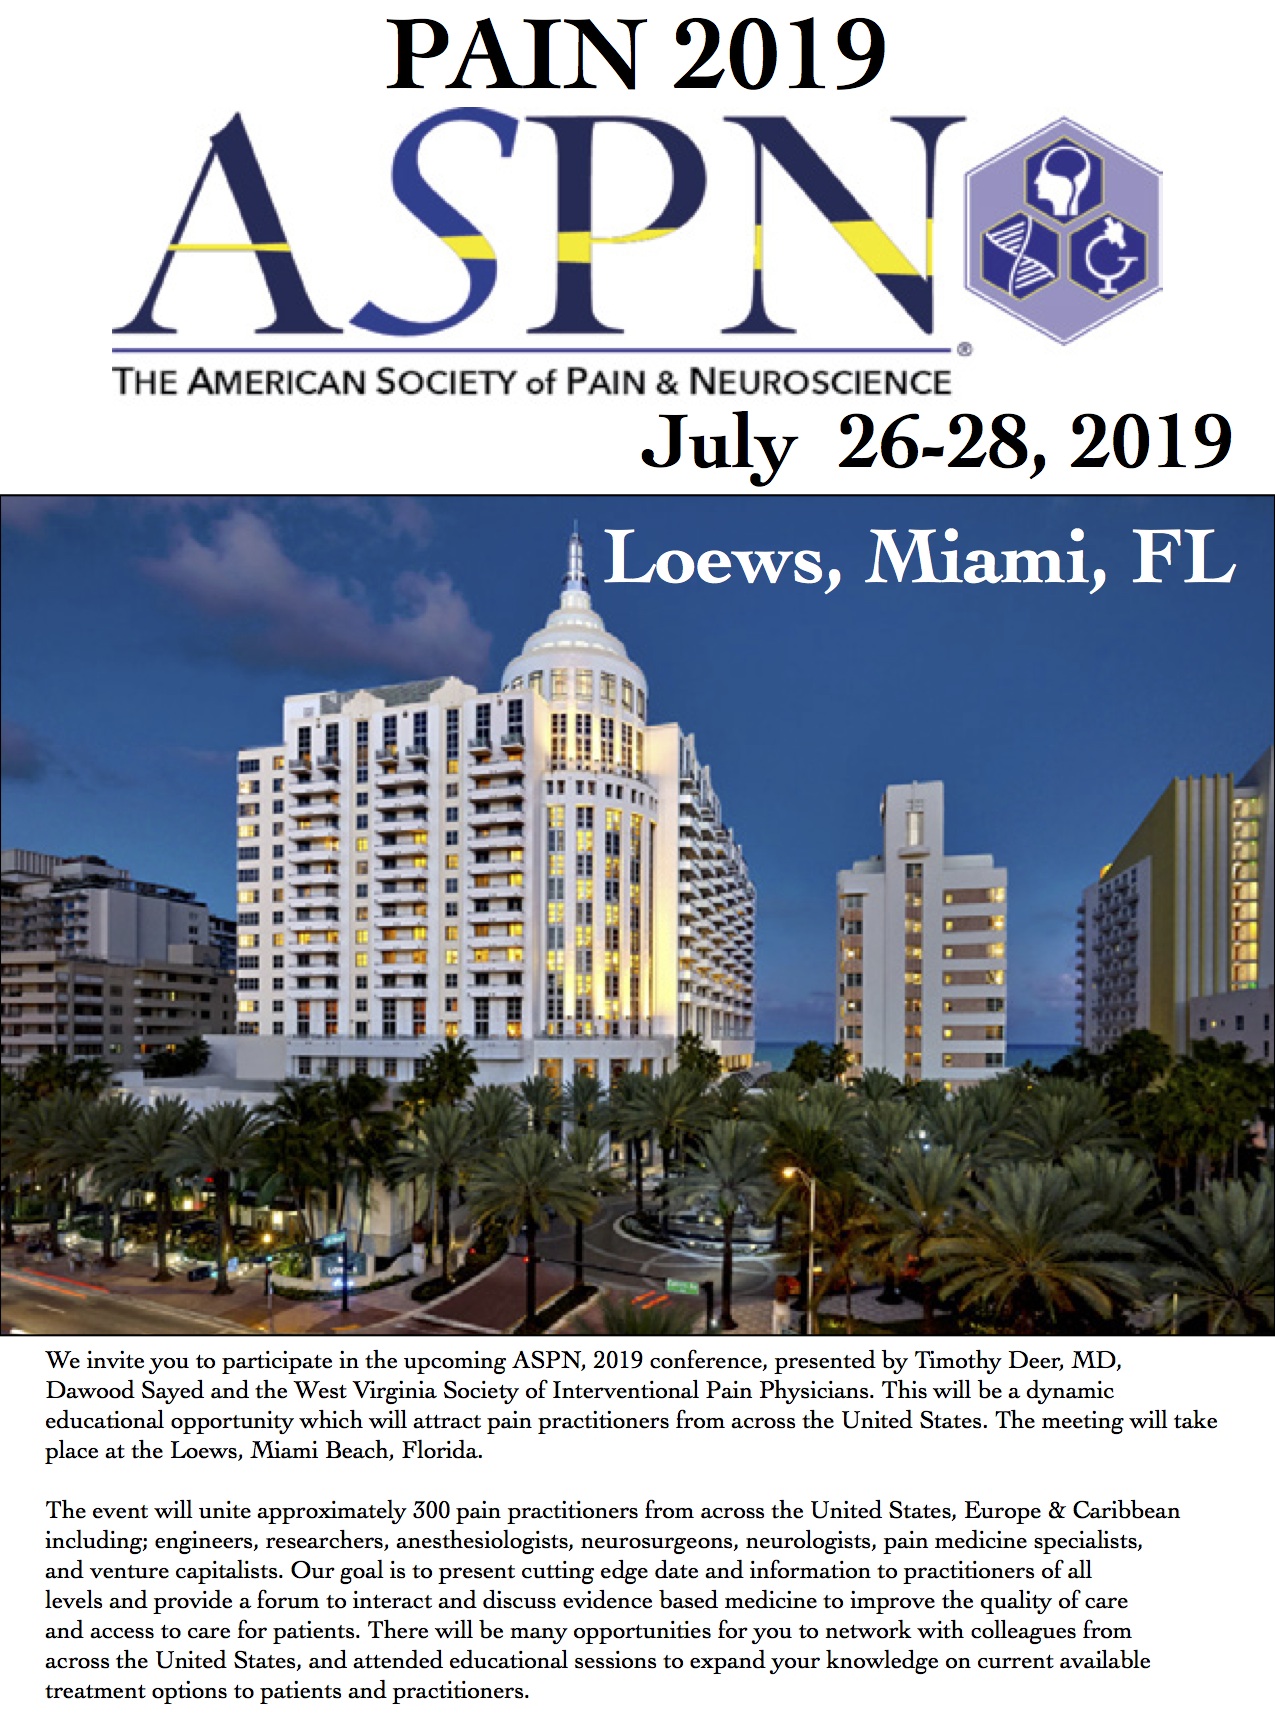 ASPN Annual Conference 2019